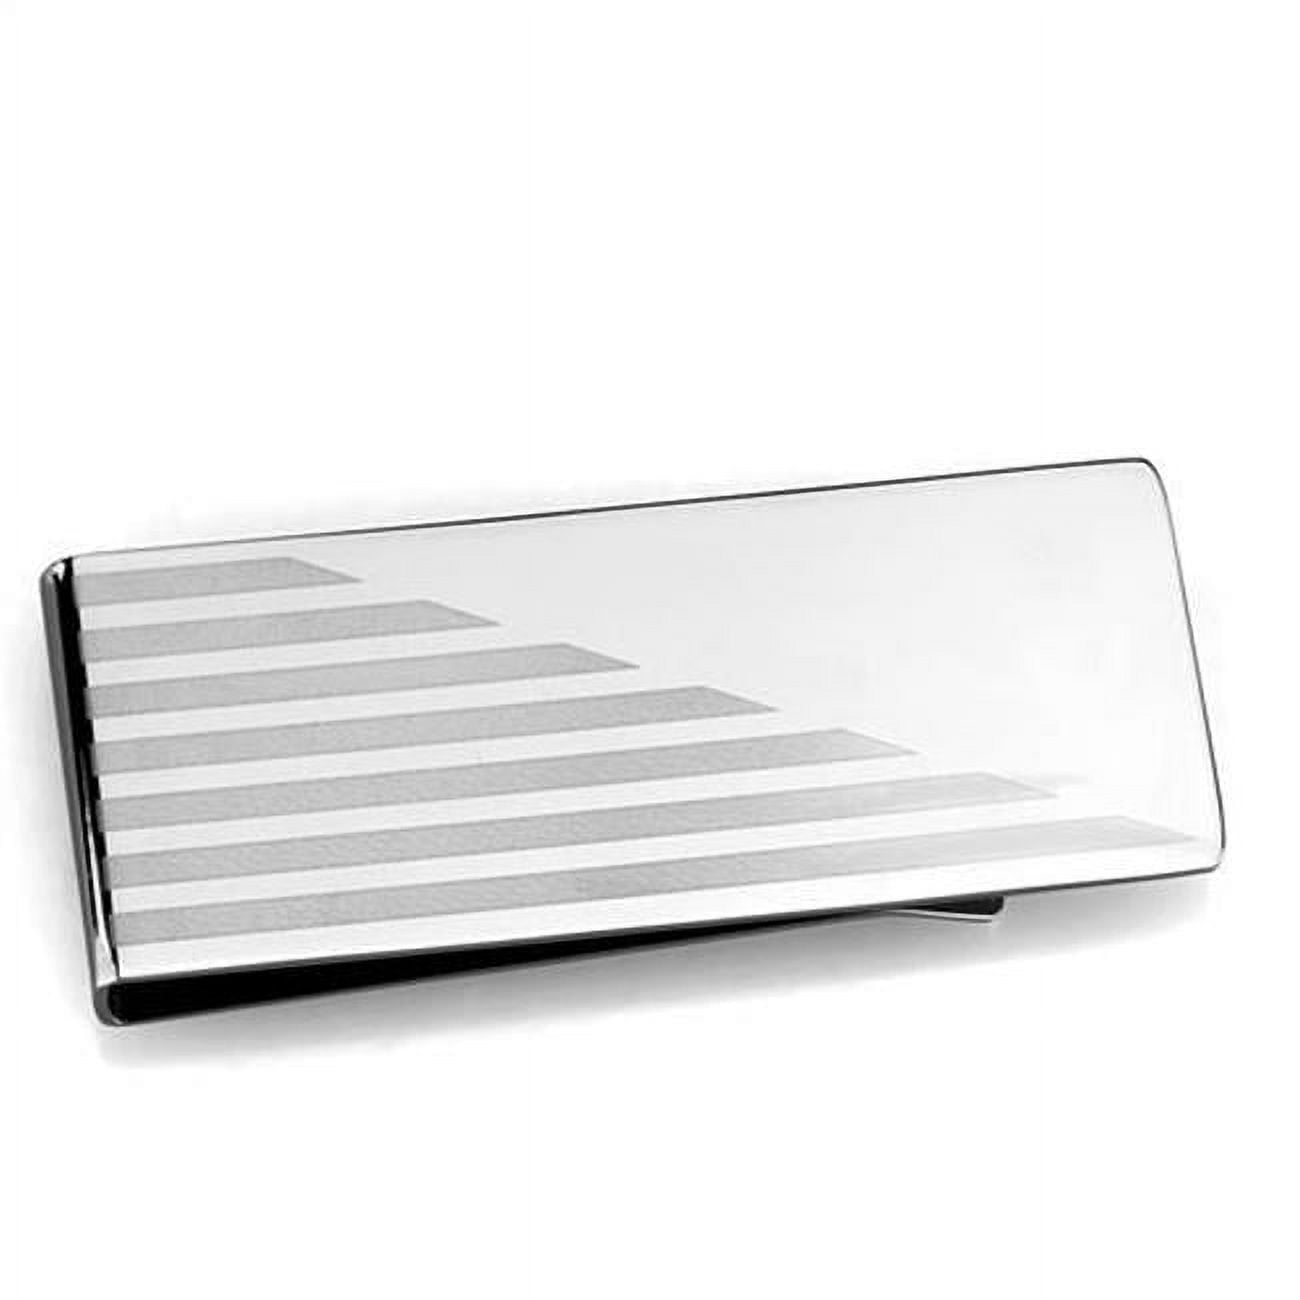 Picture of Alamode TK2077 Men High Polished Stainless Steel Money Clip with No Stone in No Stone